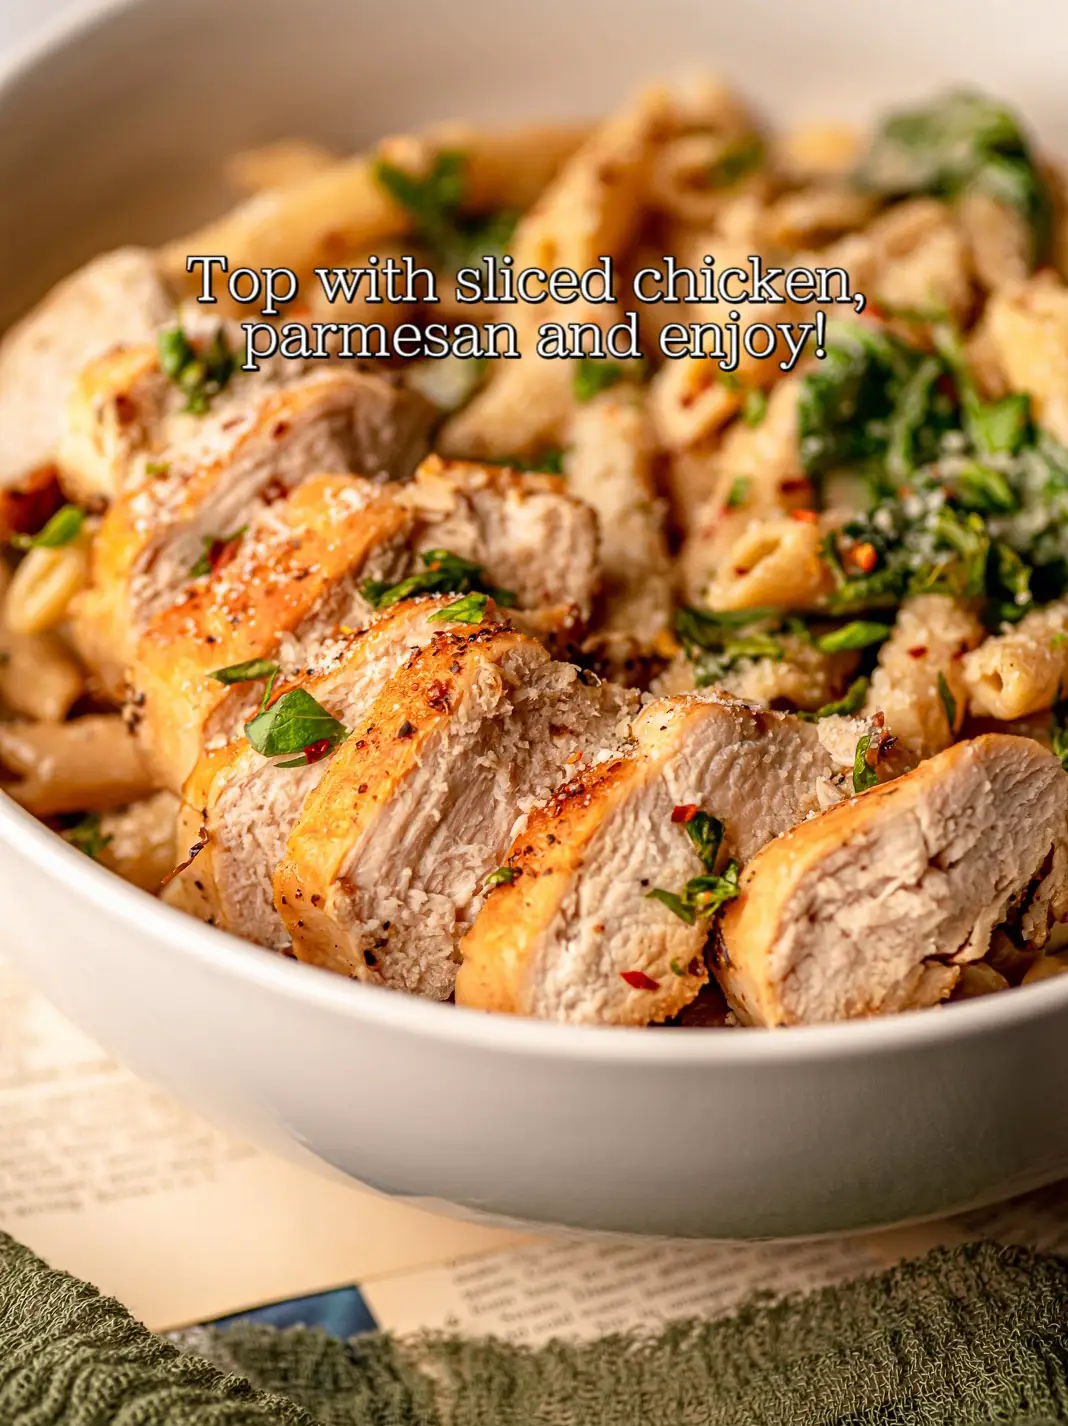 Meals with chicken - Lemon8 Search